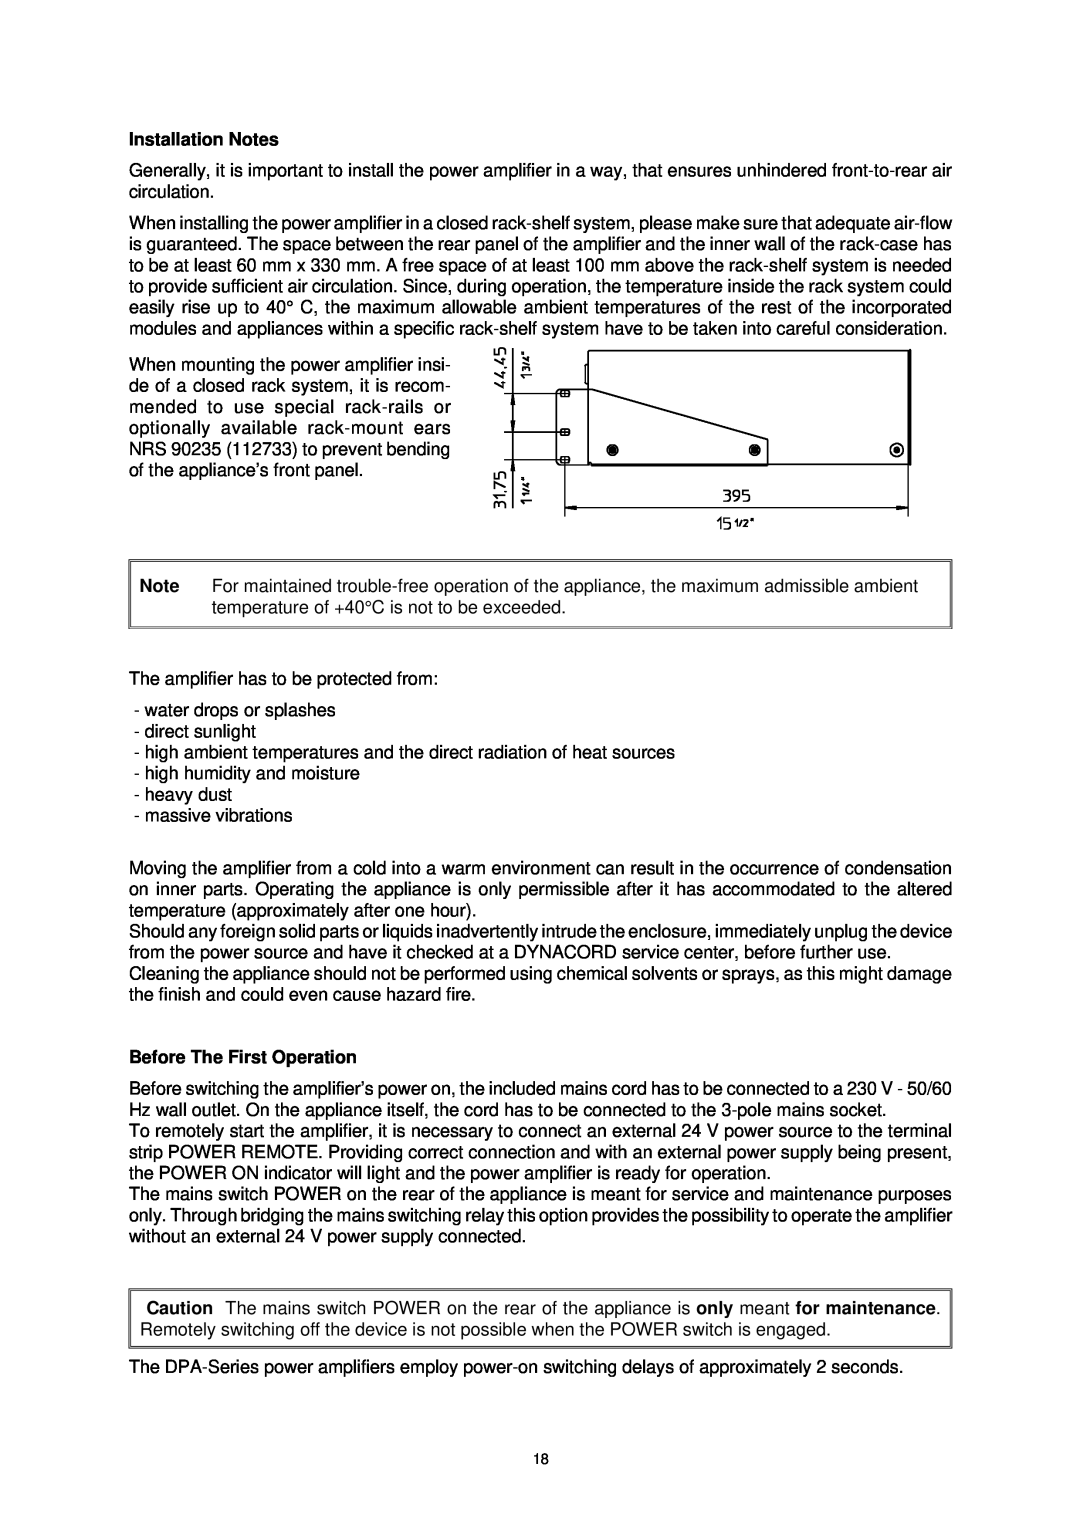 Dynacord DPA 4245, DPA 4260 owner manual Installation Notes, Before The First Operation 